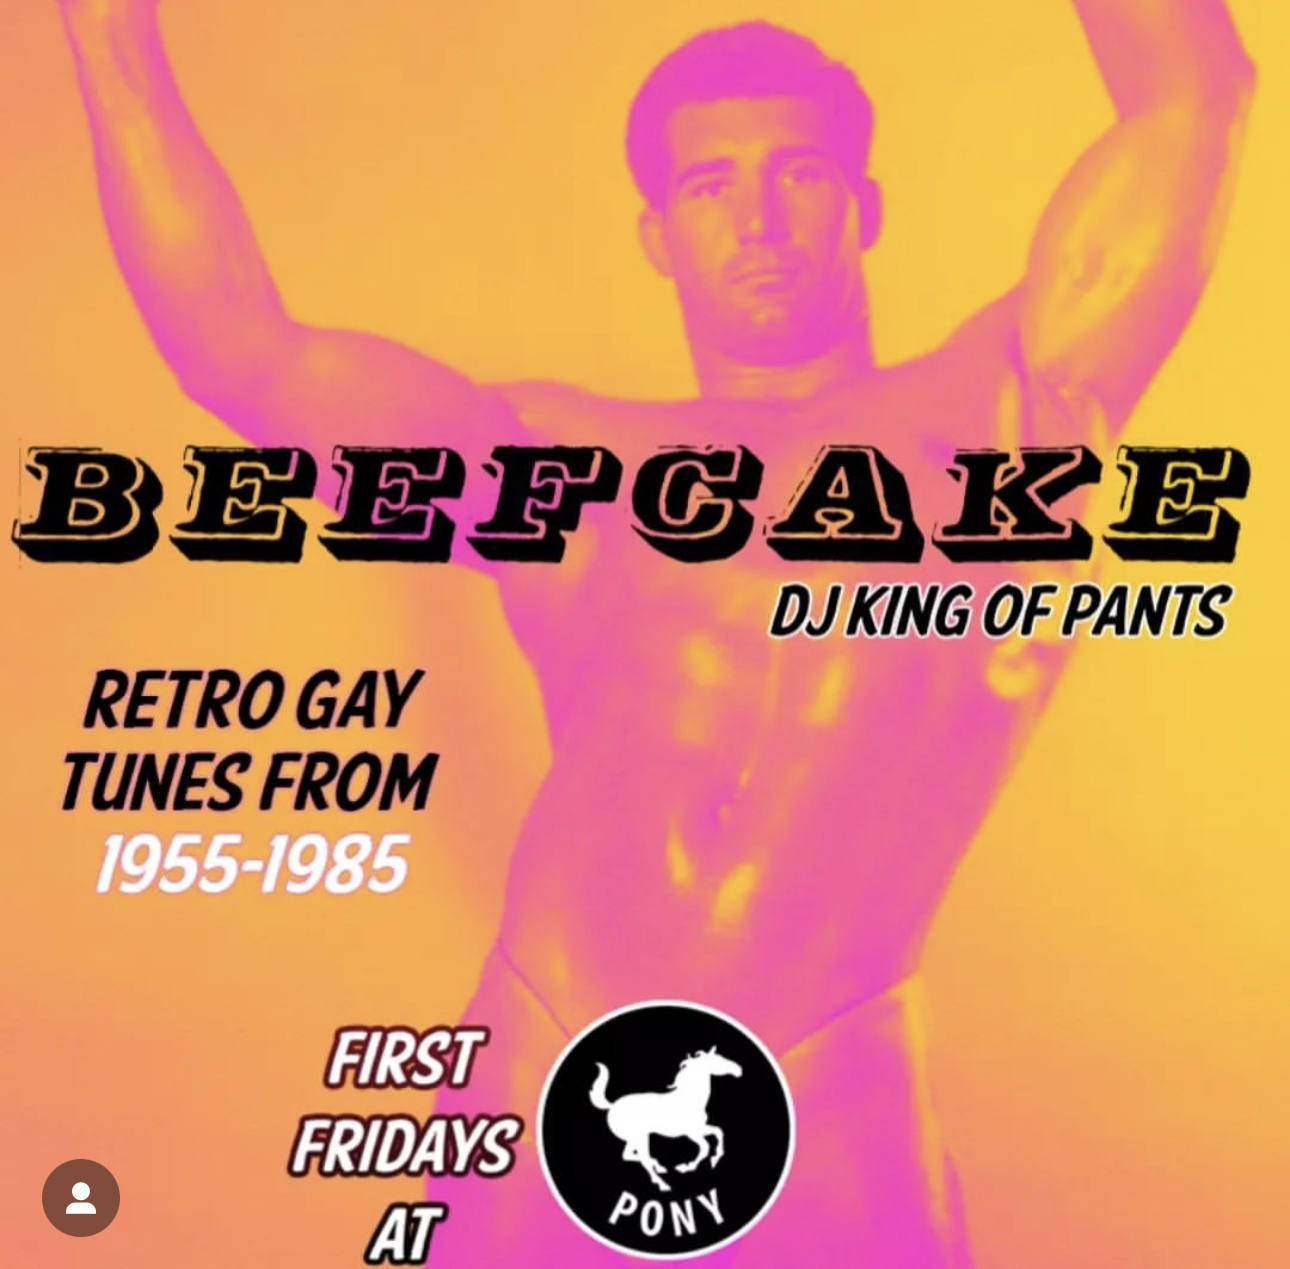 Pony 1st Fridays Beefcake Retro Gay Tunes from 1955-1985 with DJ King of Pants